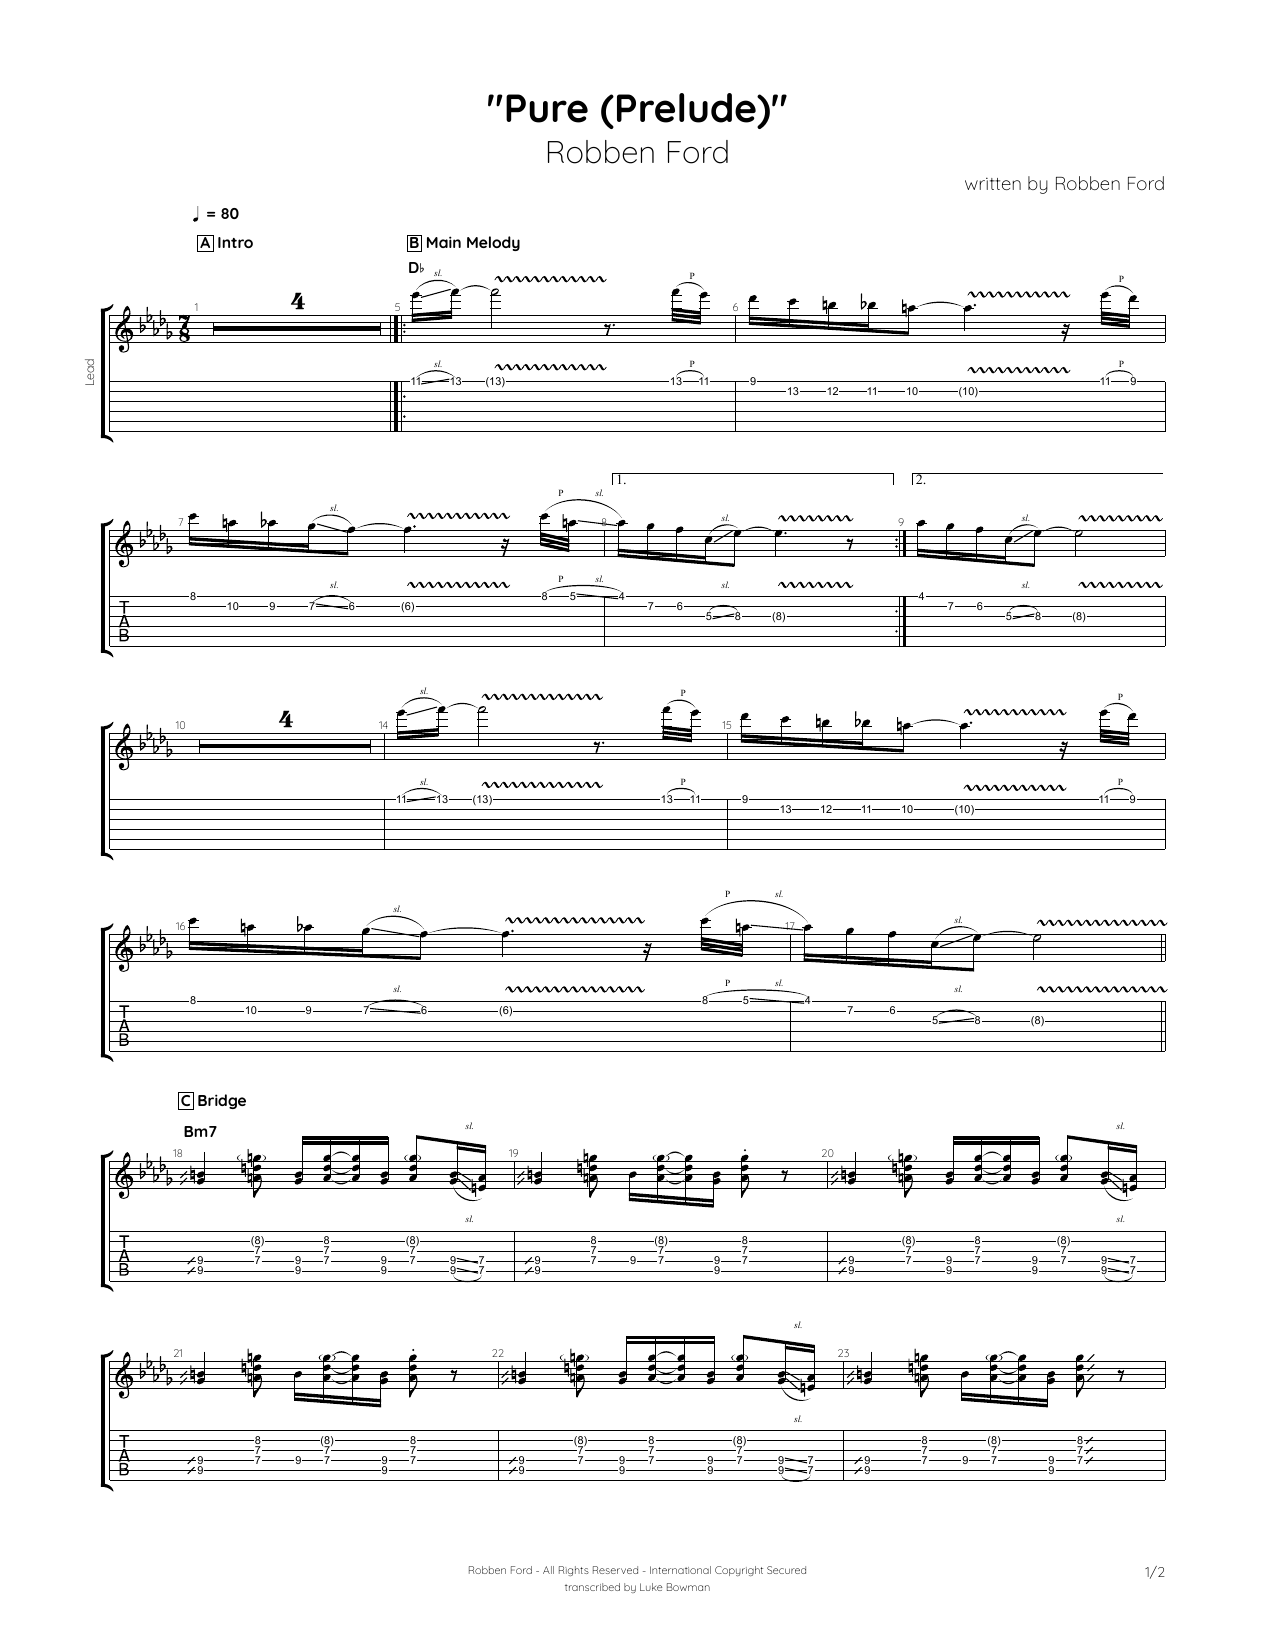 Download Robben Ford Pure (Prelude) Sheet Music